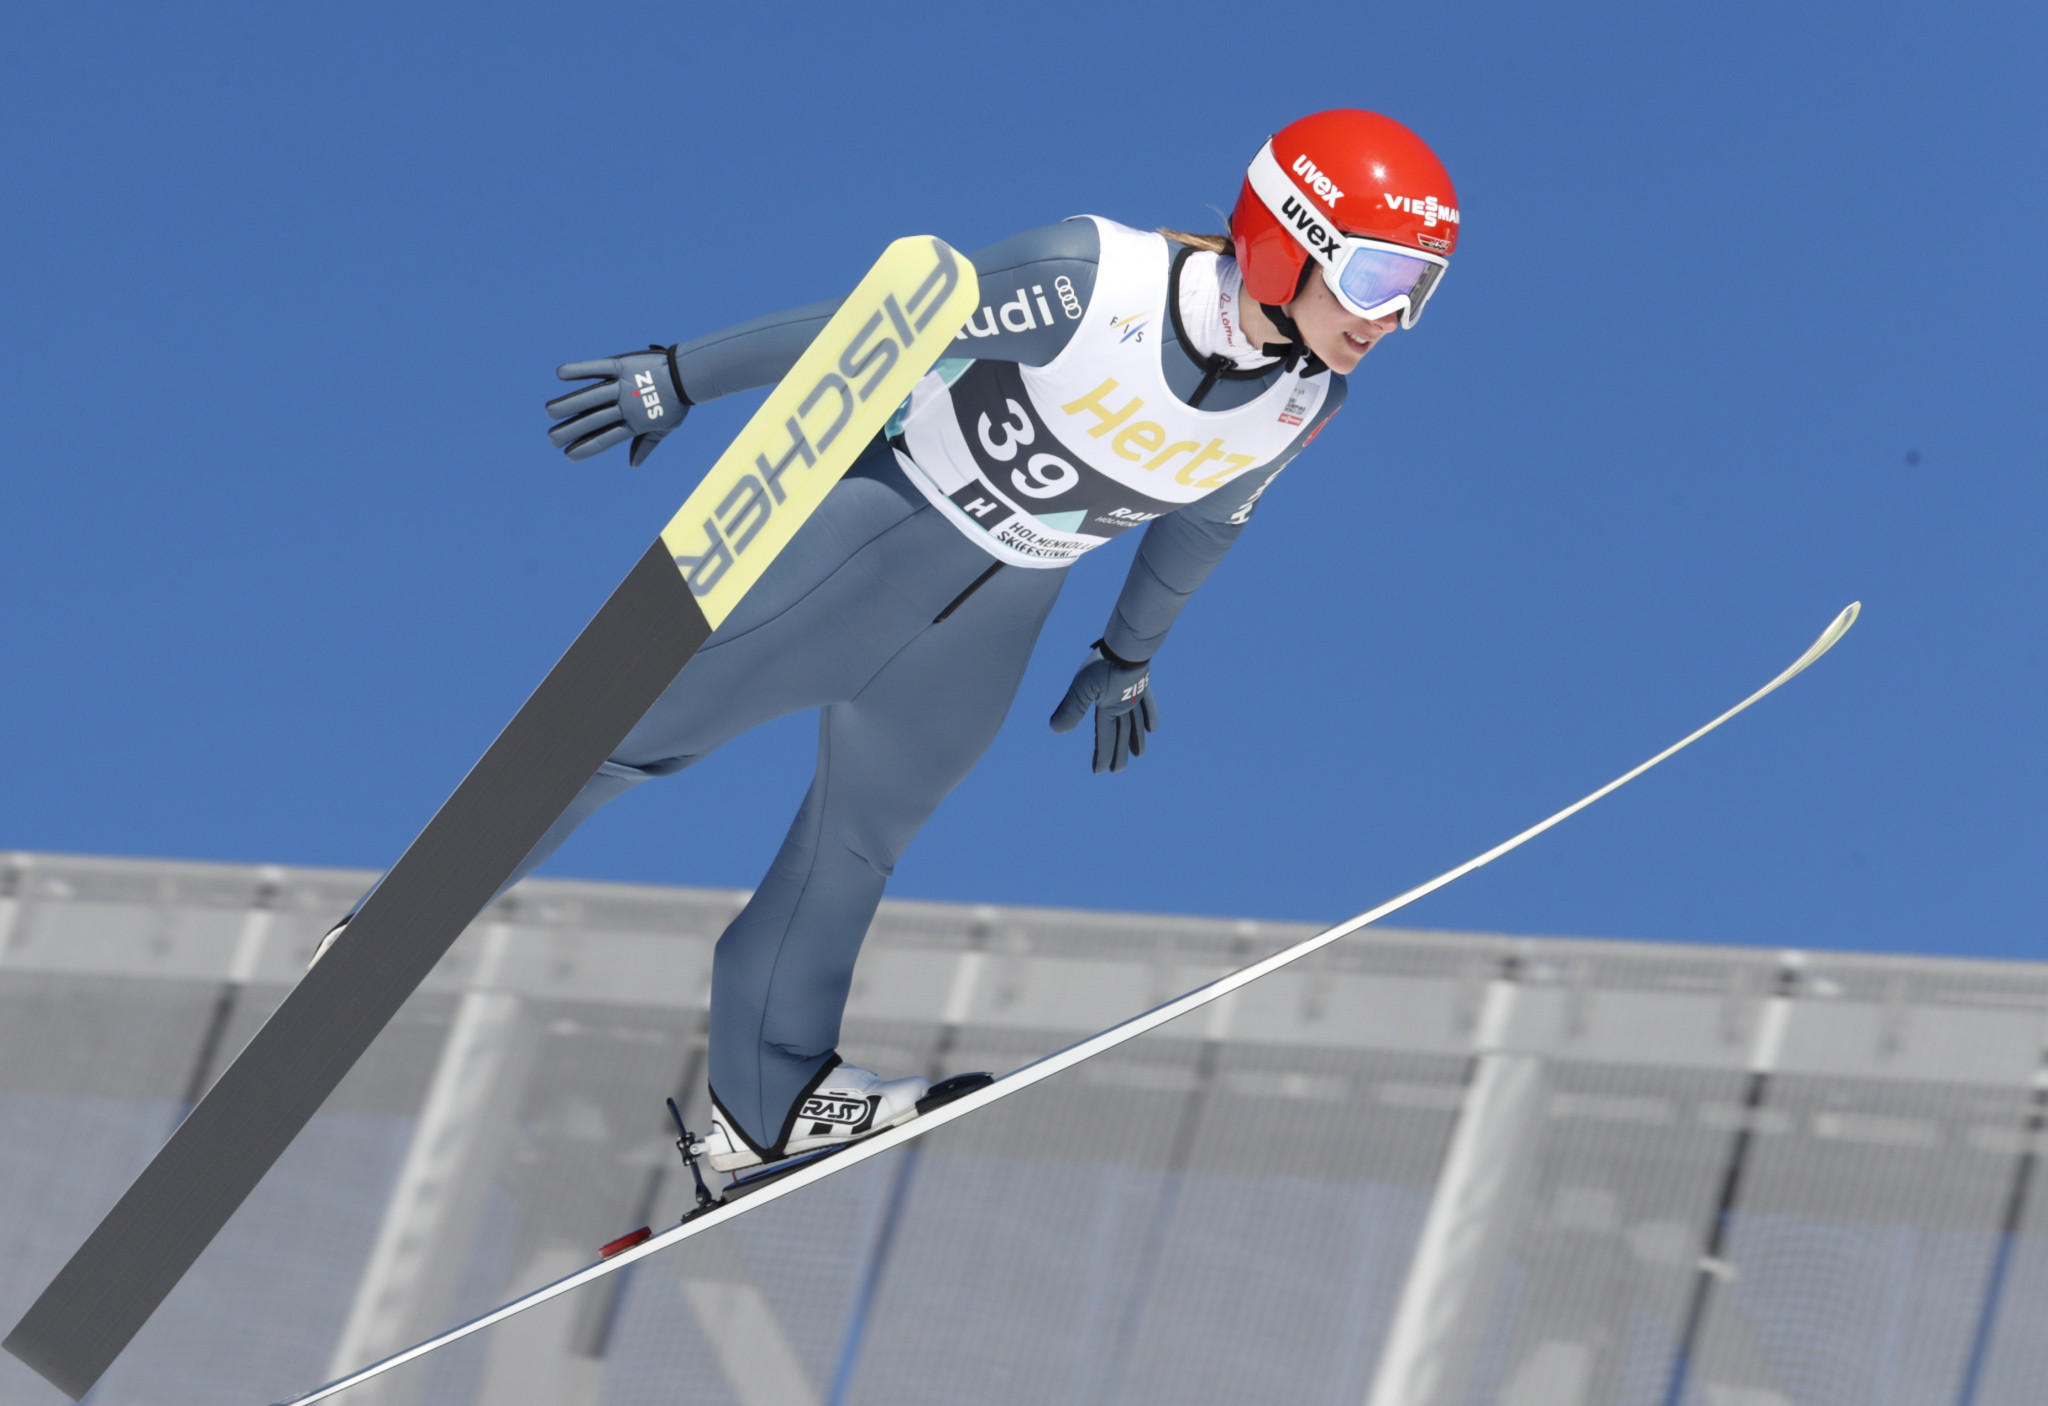 Katharina Althaus is expected to be a main contender at the FIS Ski Jumping World Cup event in Lillehammer ©Getty Images